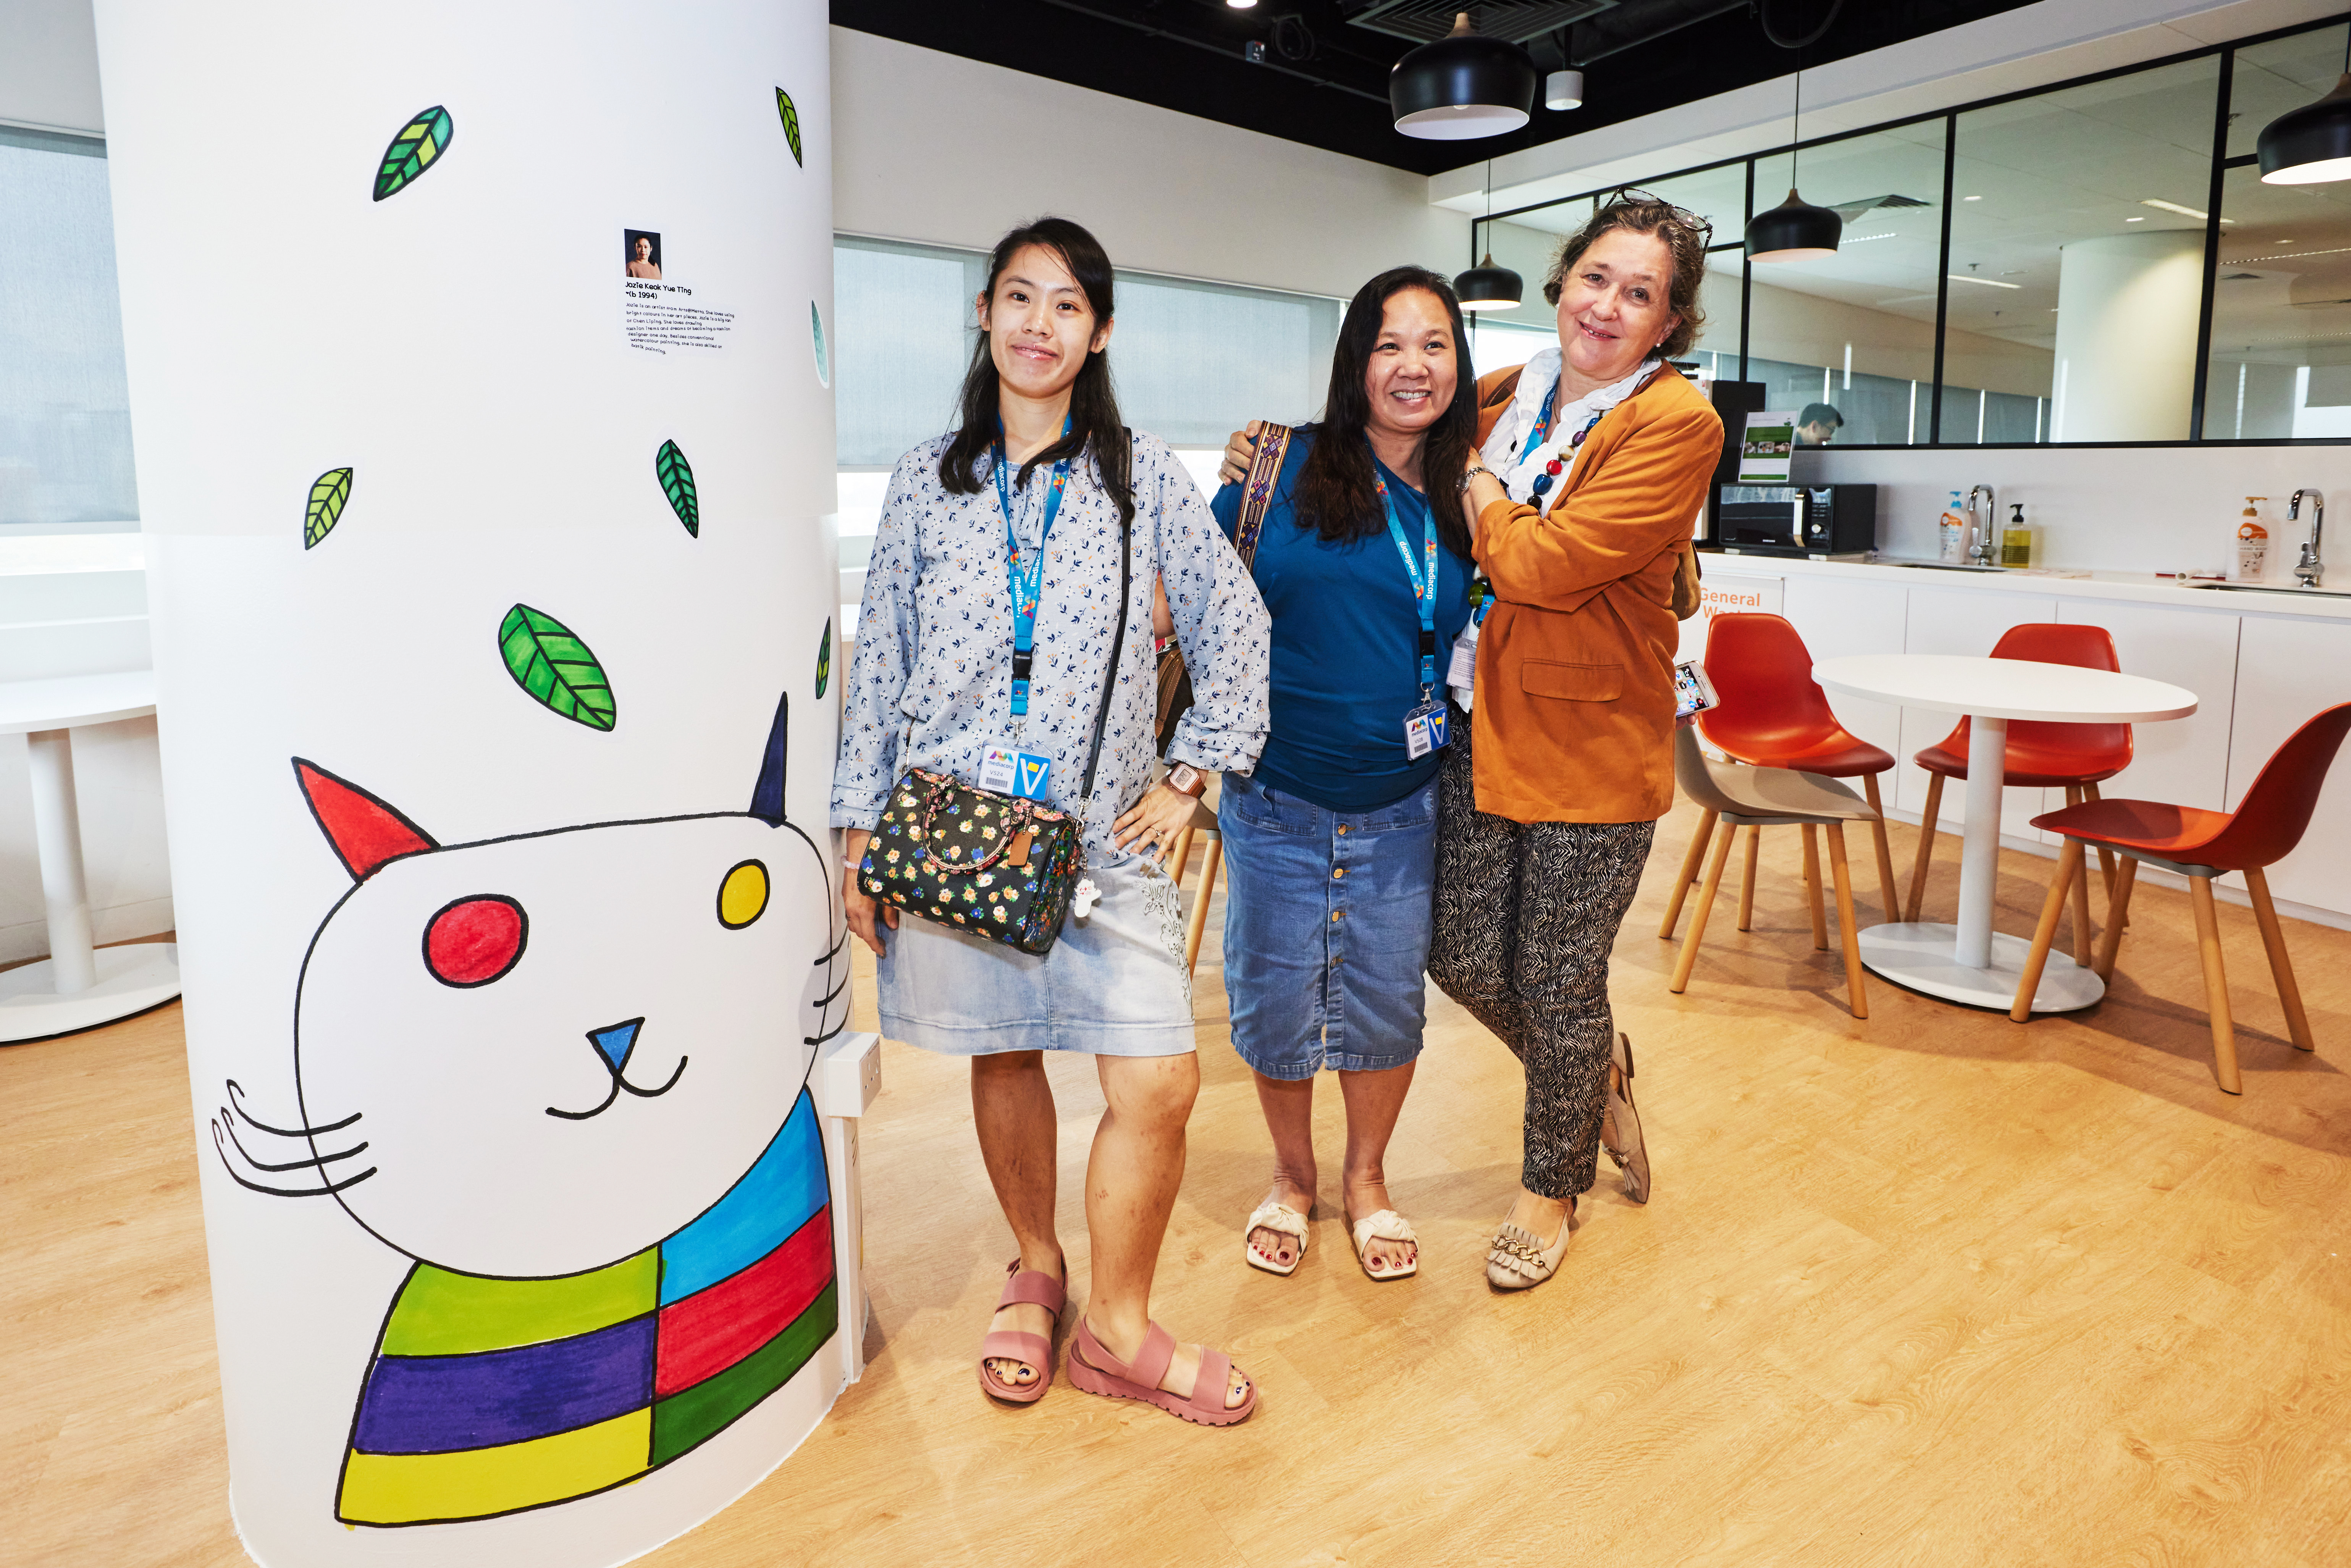 Jozie Keok - Artist with autism from Metta Welfare Association, poses with her mother and Dr Esther by her wall sticker mural depicting an artistic rendition of a cat